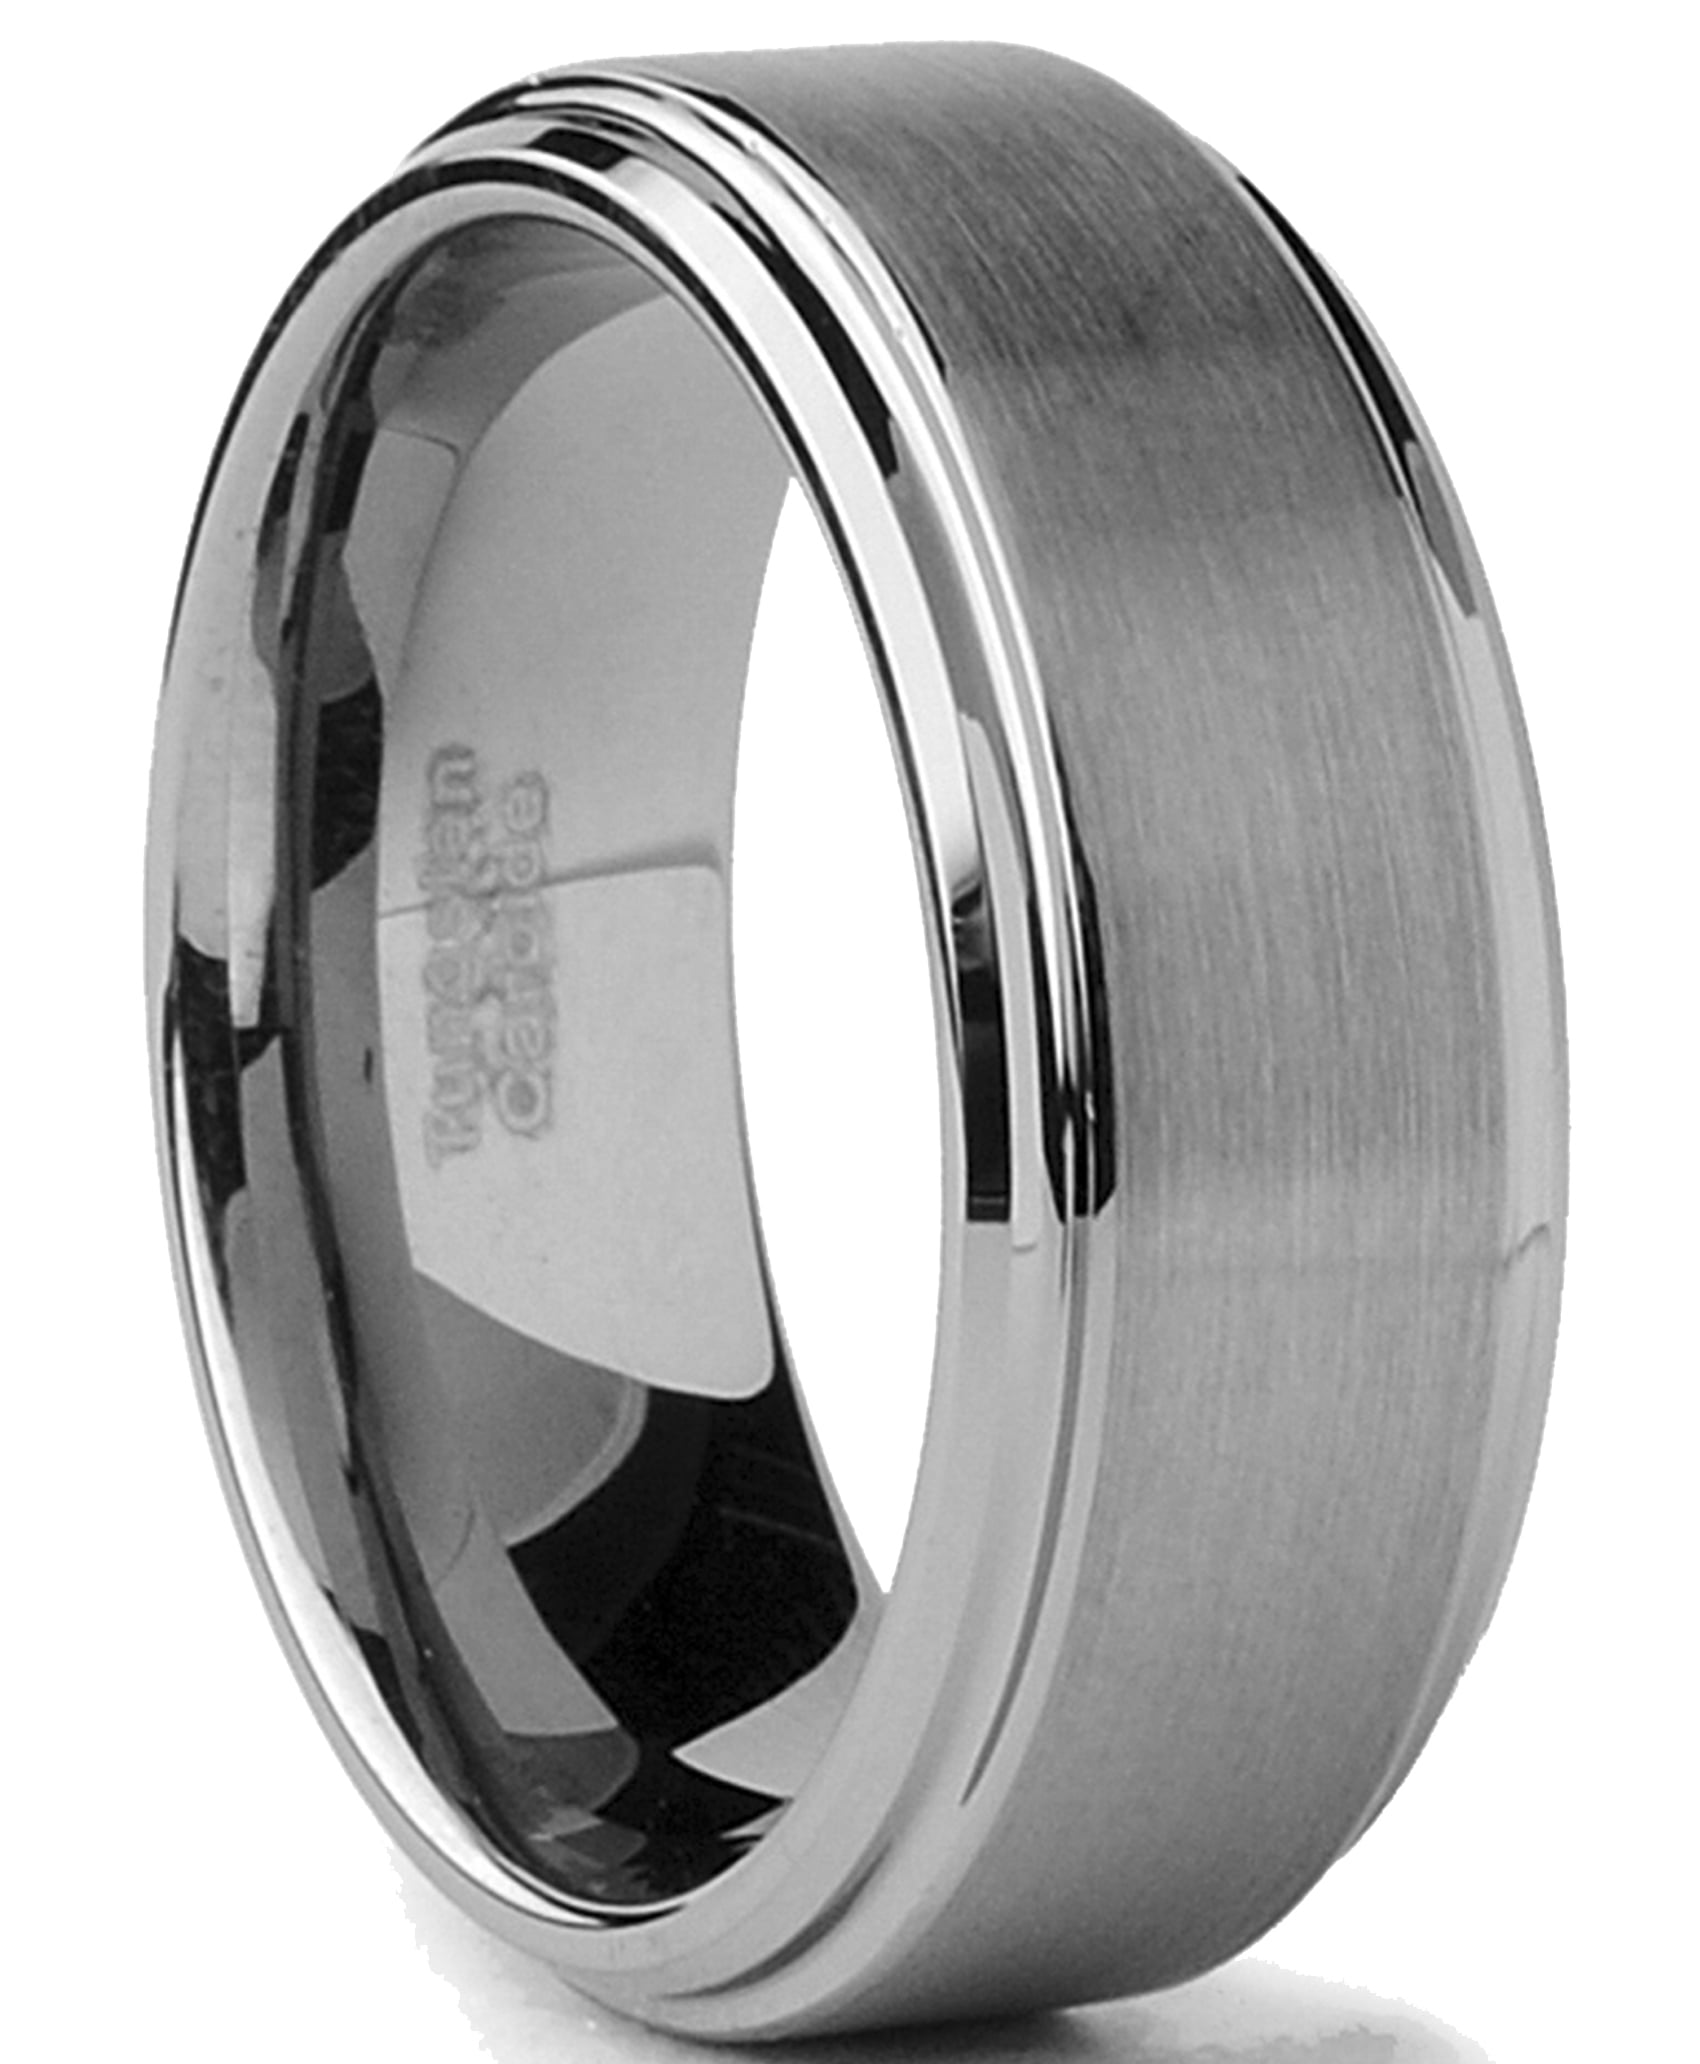 Mens Stainless Steel Polished Wedding Band Ring